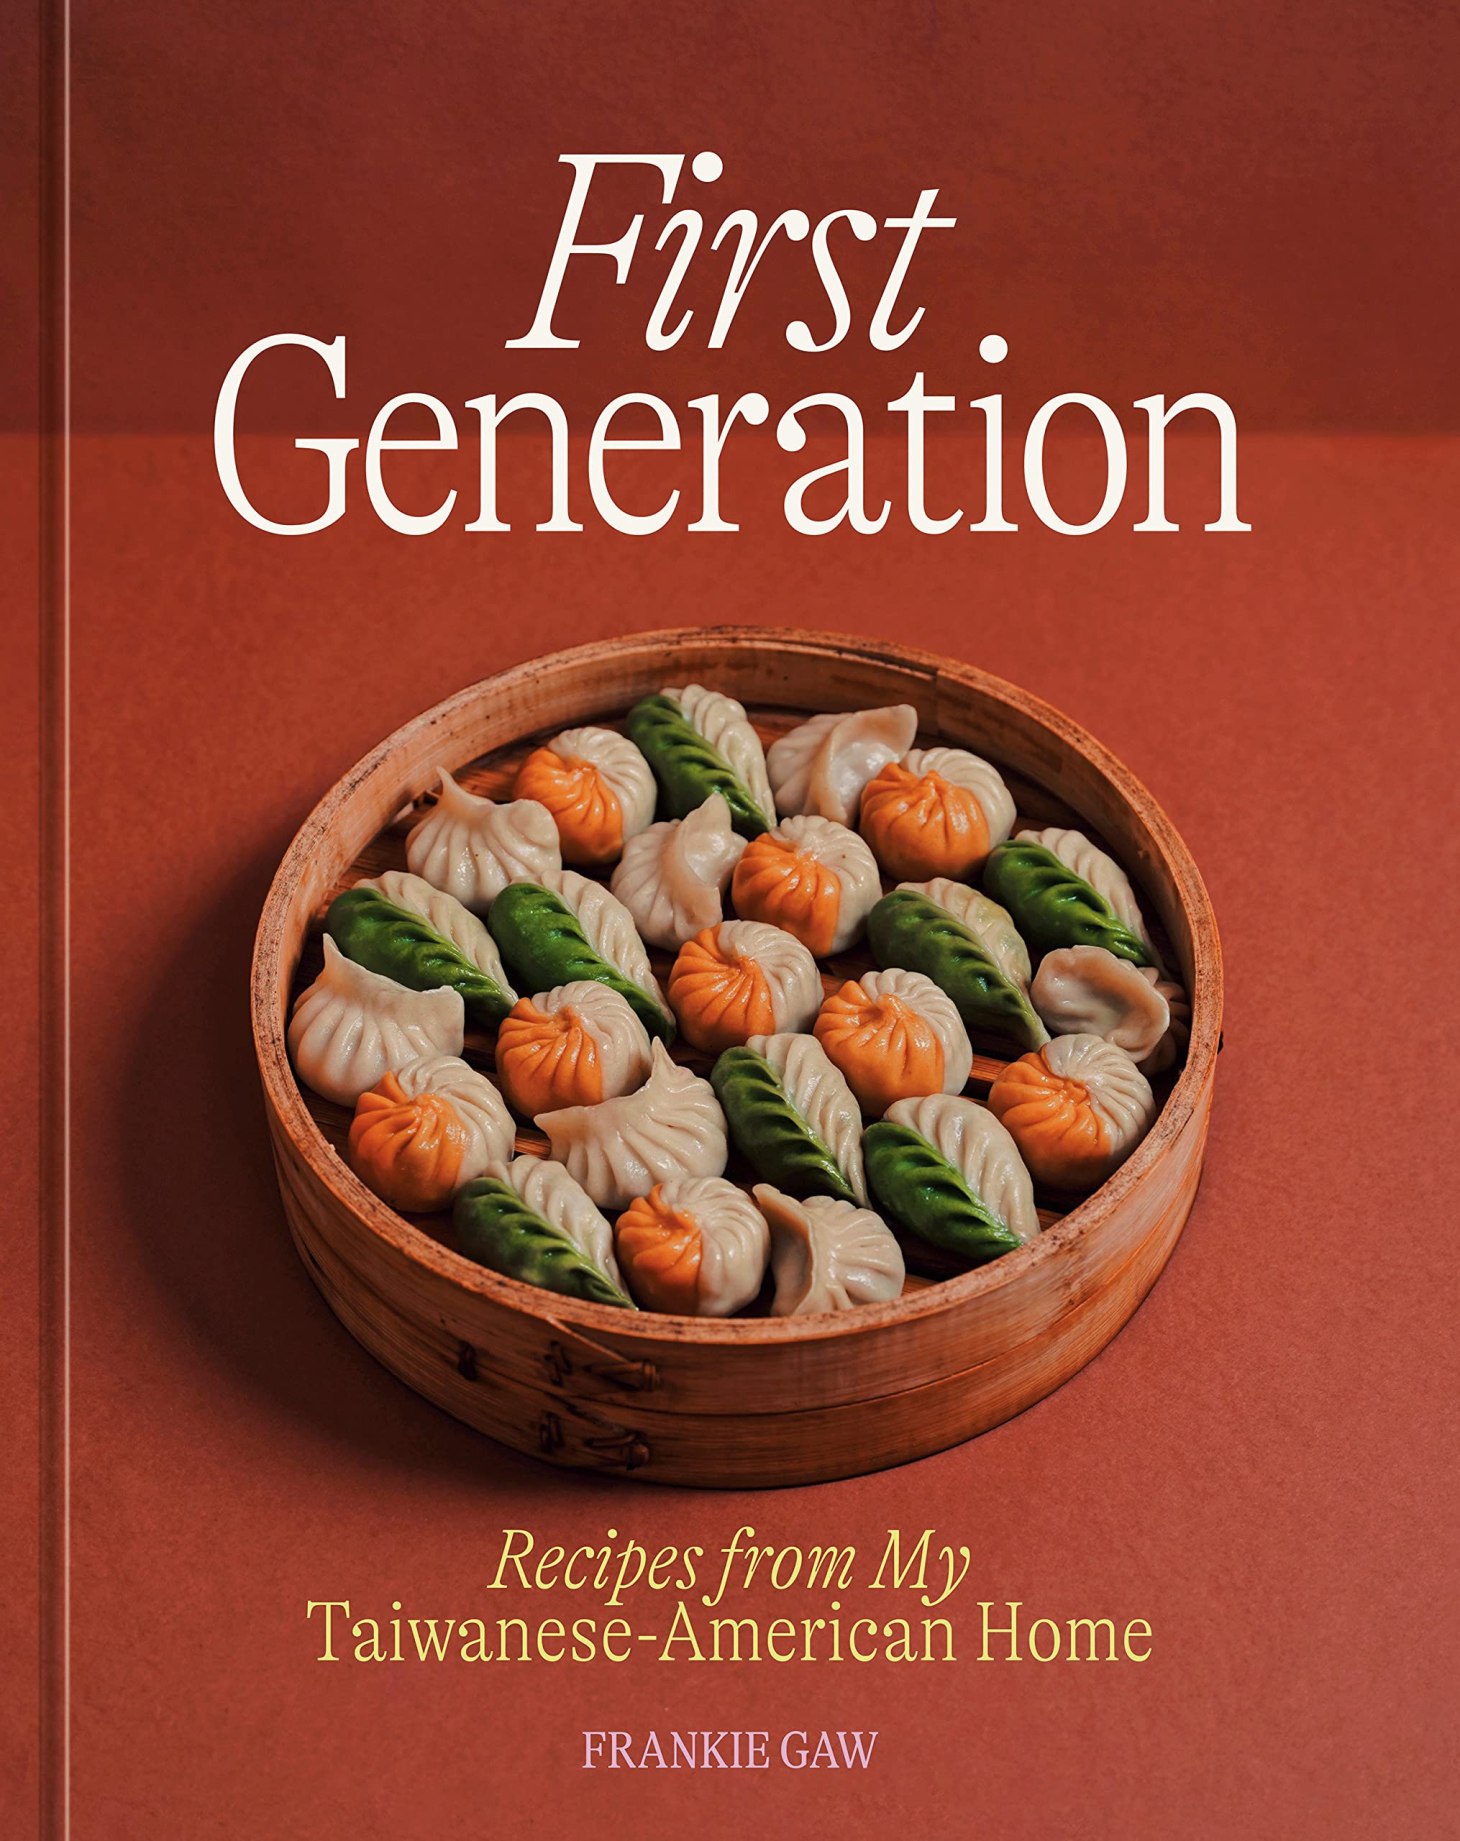 first generation by frankie gaw, a mother's day food gift